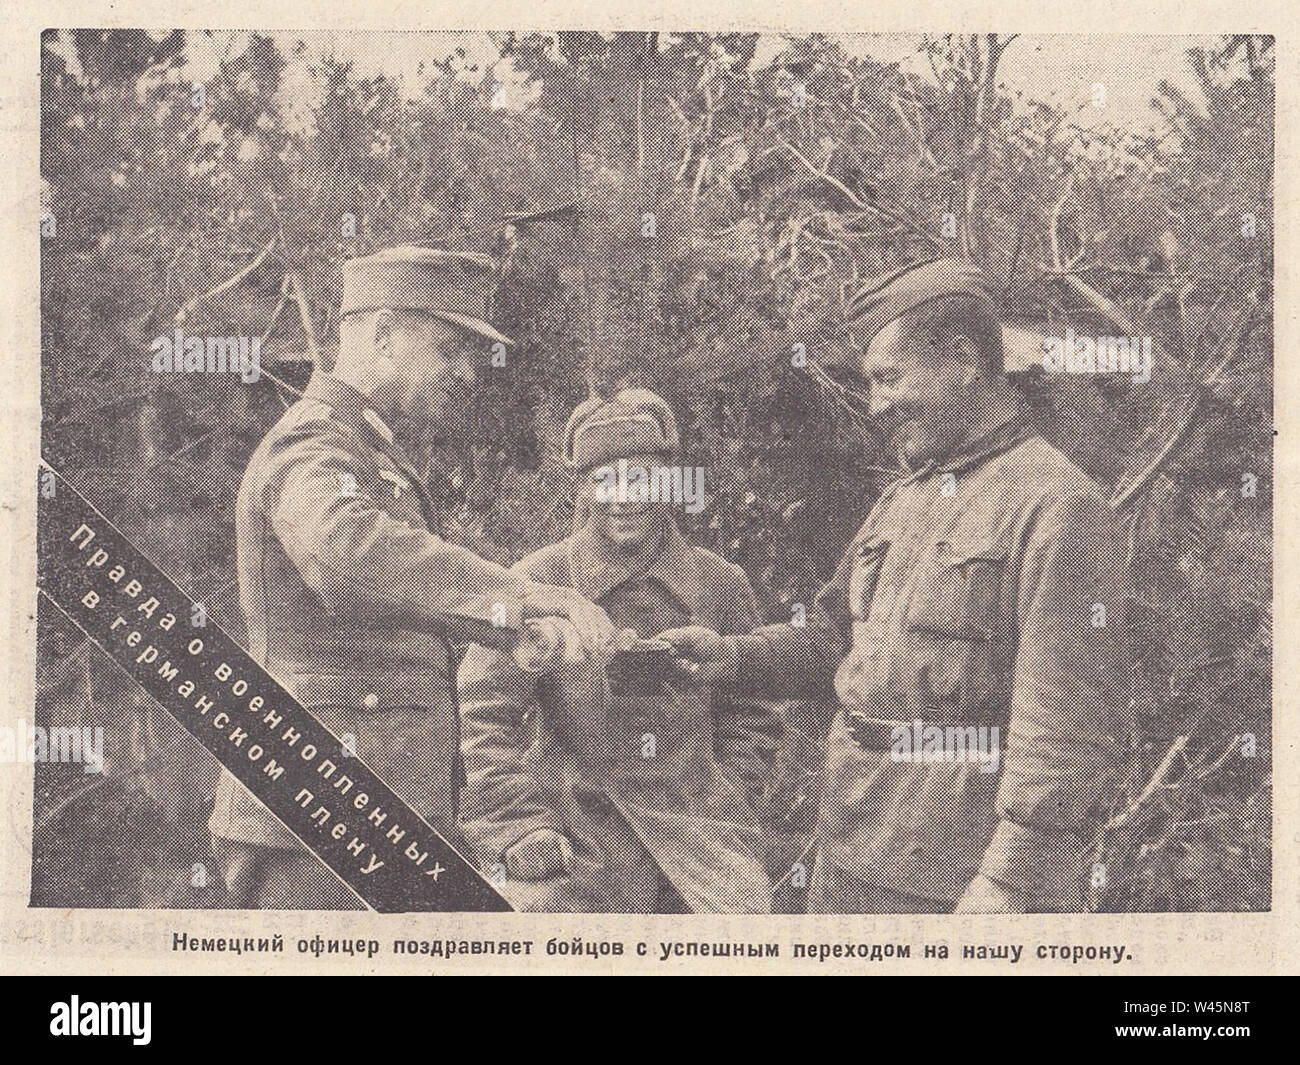 German officer congratulates Soviet fighters with a successful transition to their side. The truth about prisoners of war in German captivity. Photo from the newspaper of the 1940s. Stock Photo